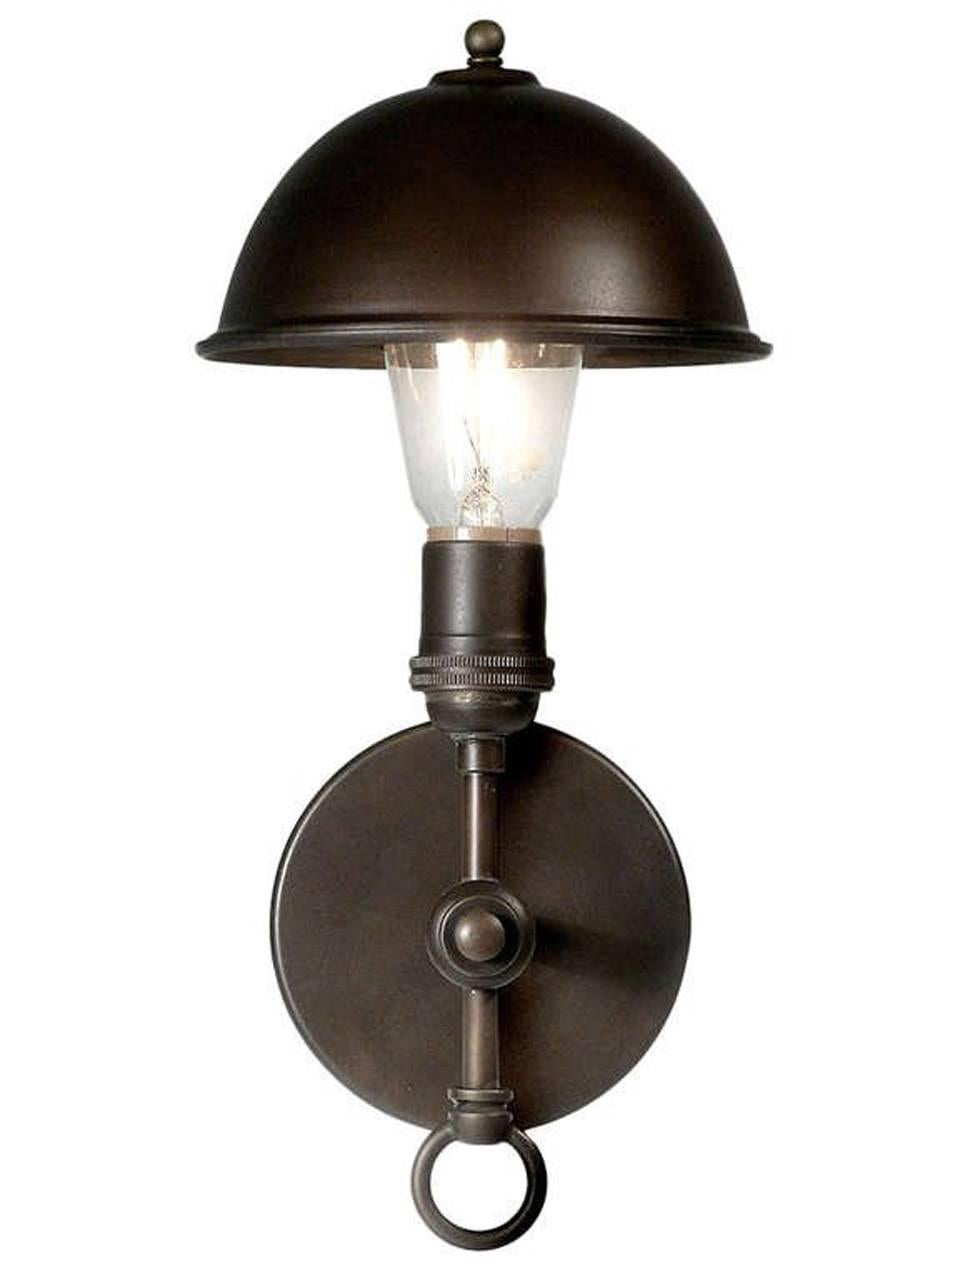 This lamp is so clean and simple it fits with almost any style. The 1920s style brass clip on Greist dome has a six inch diameter and can tilt in any direction.